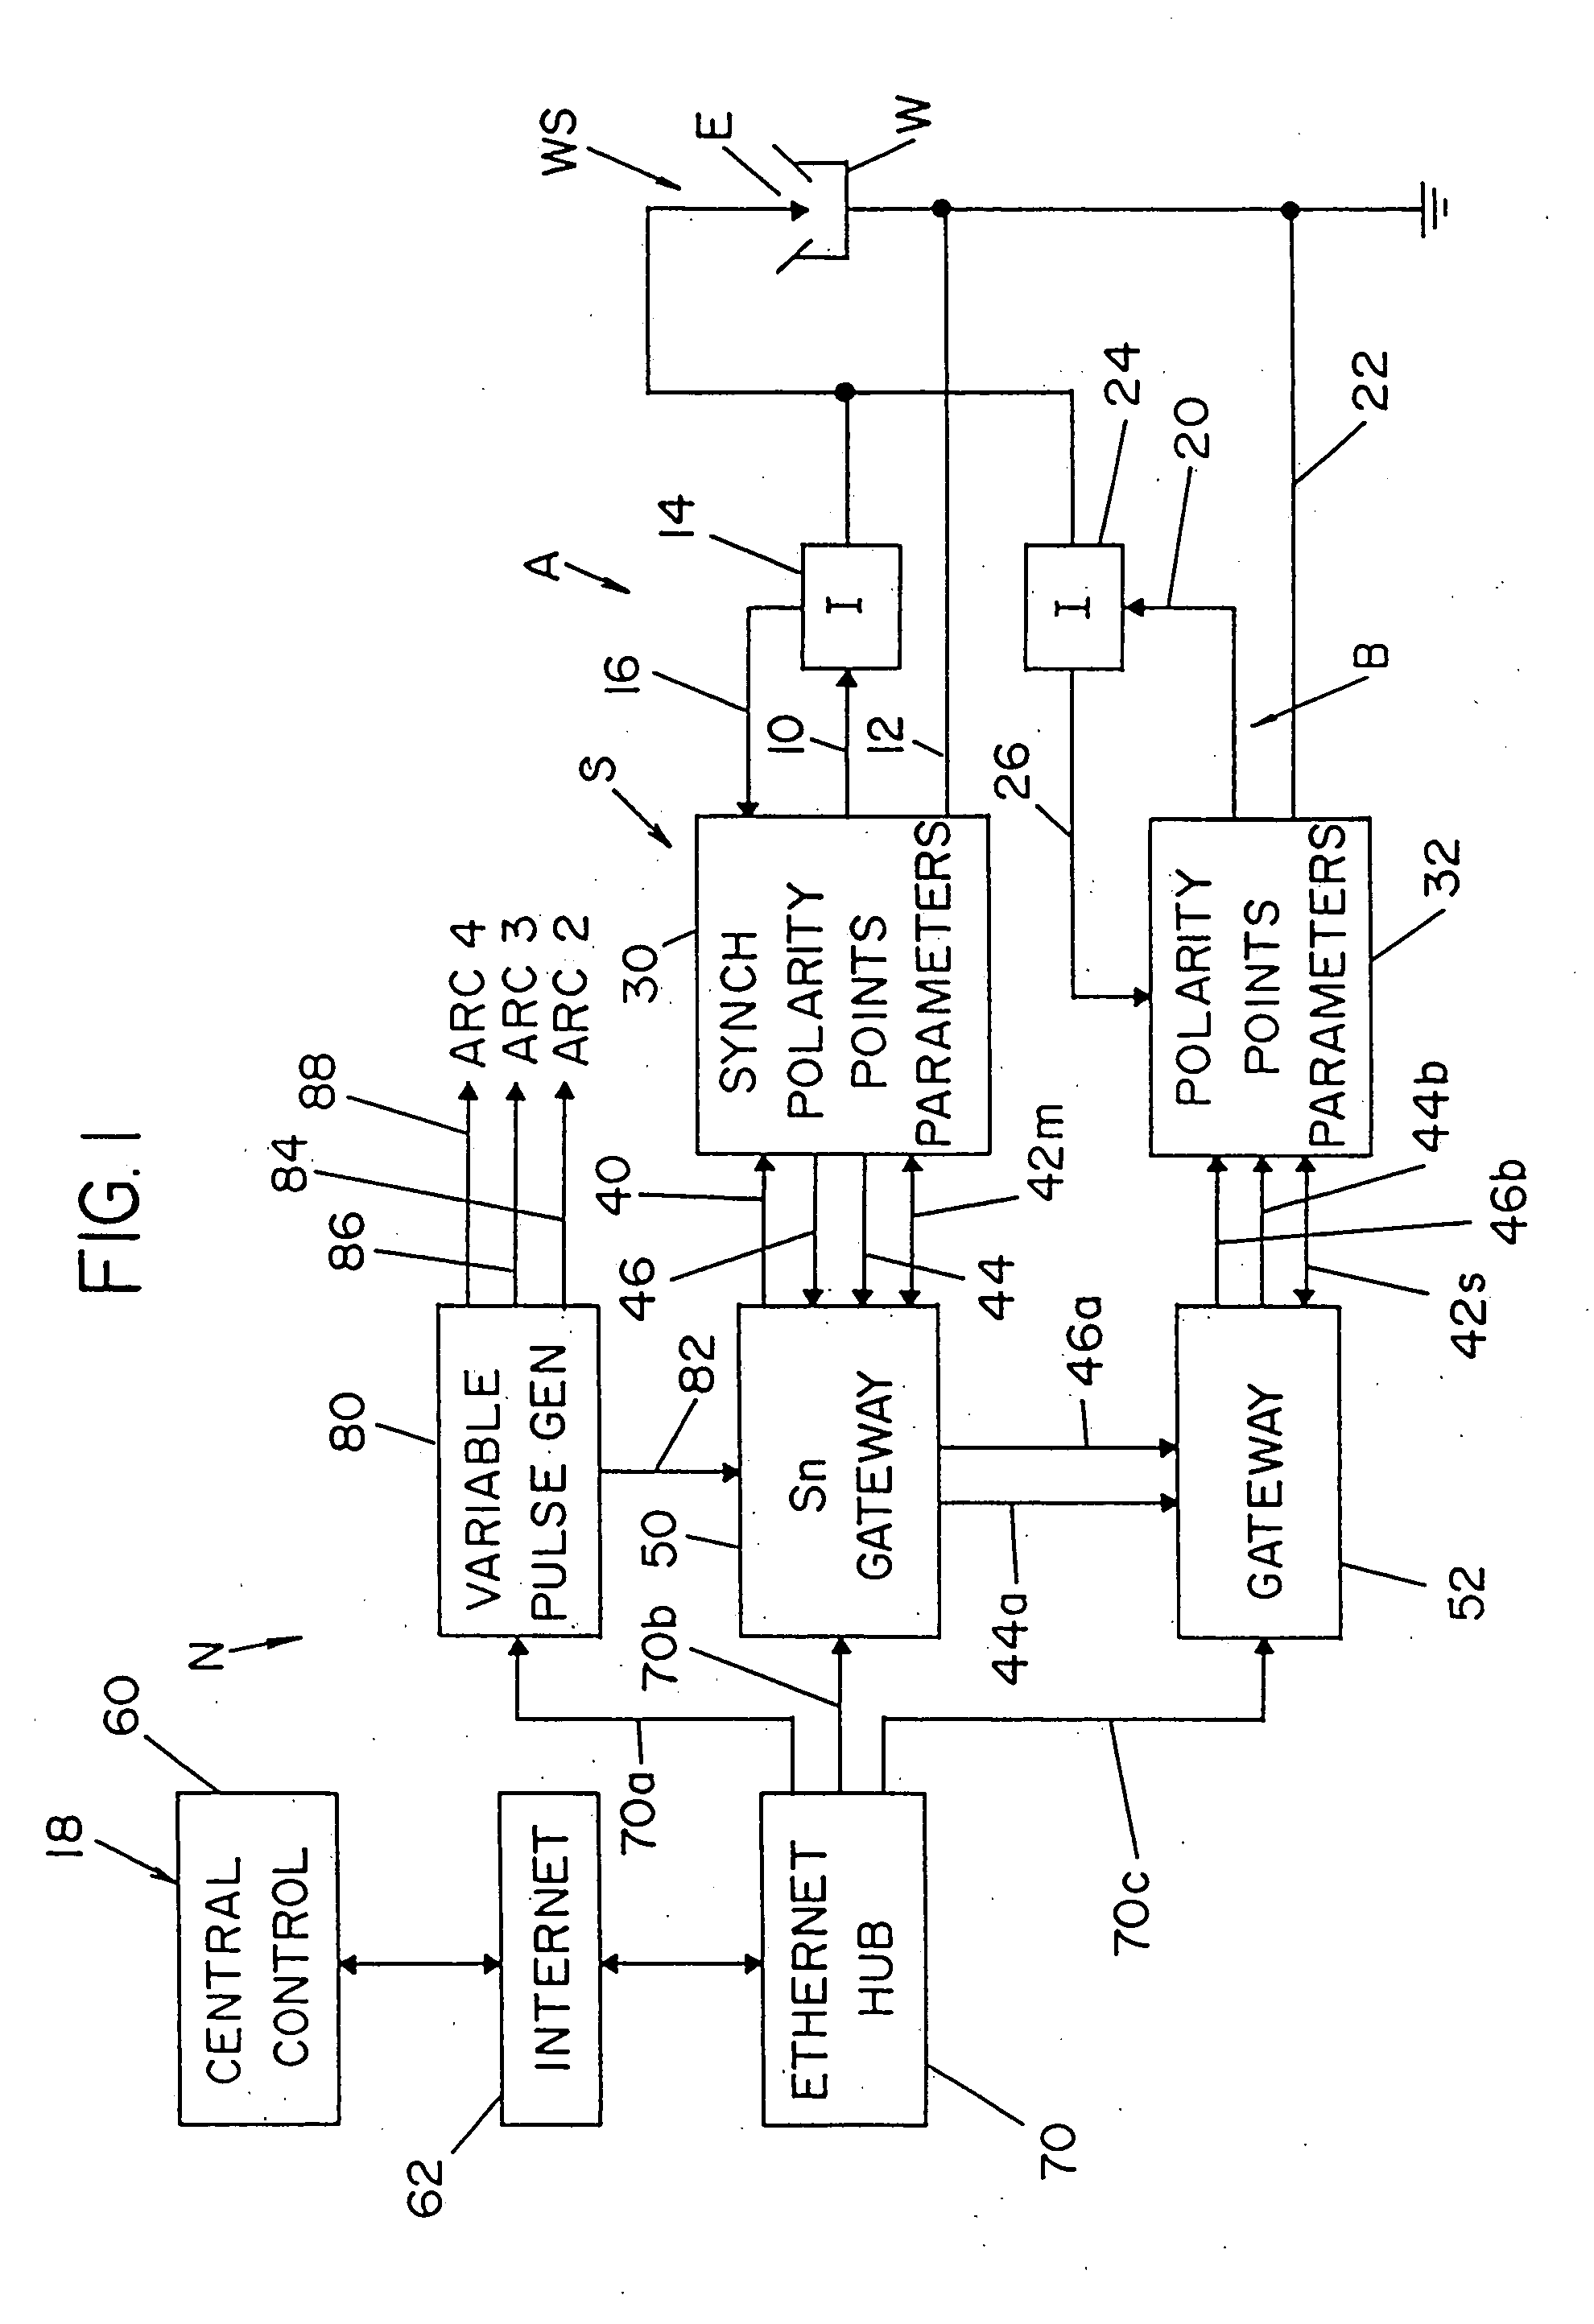 Method of AC welding with cored electrode